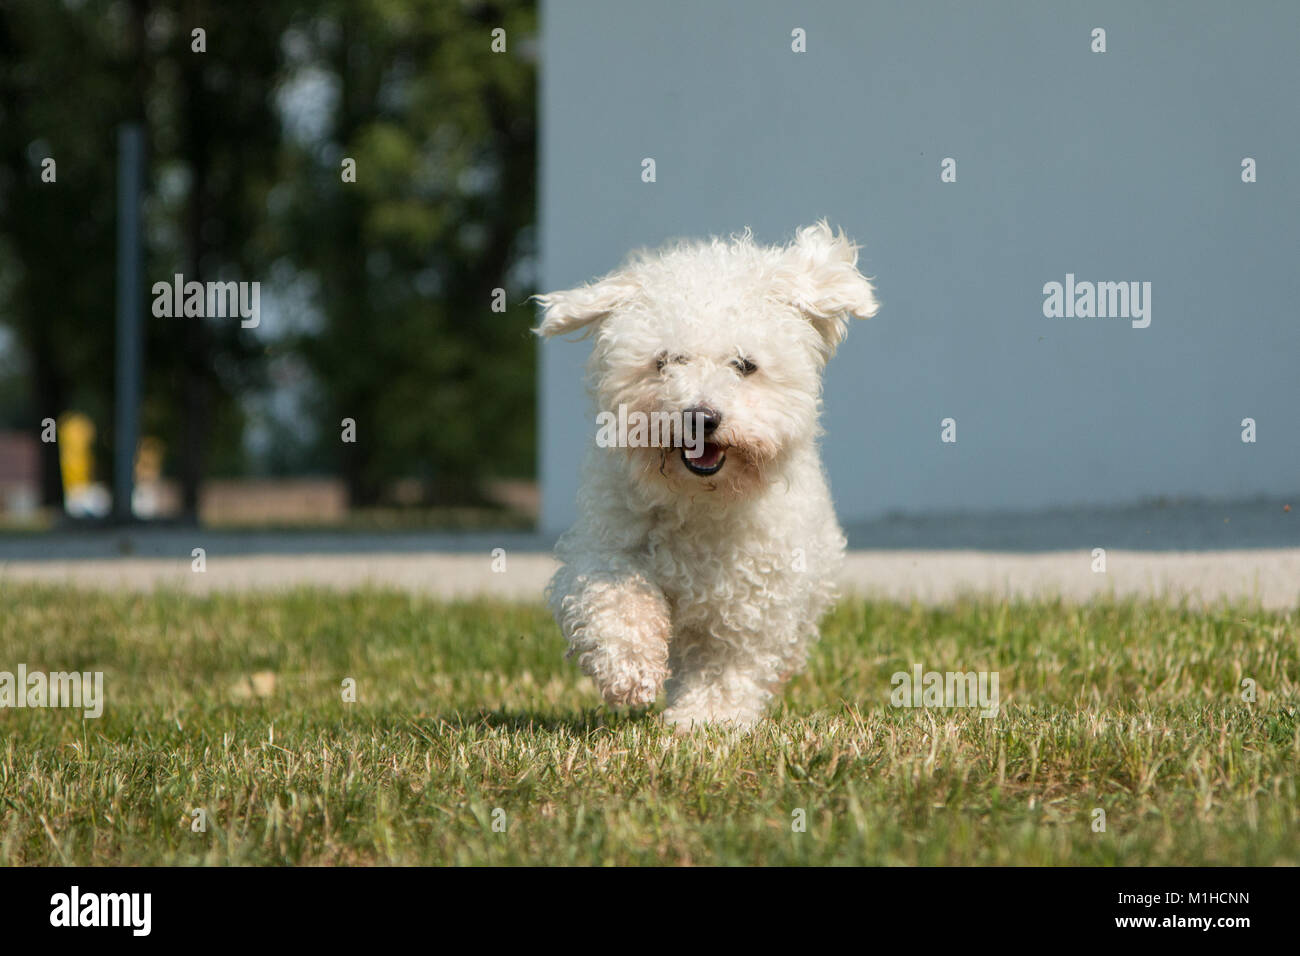 A portrait of the bichon frise dog, walking towards you and looking very happy and relaxed. Stock Photo